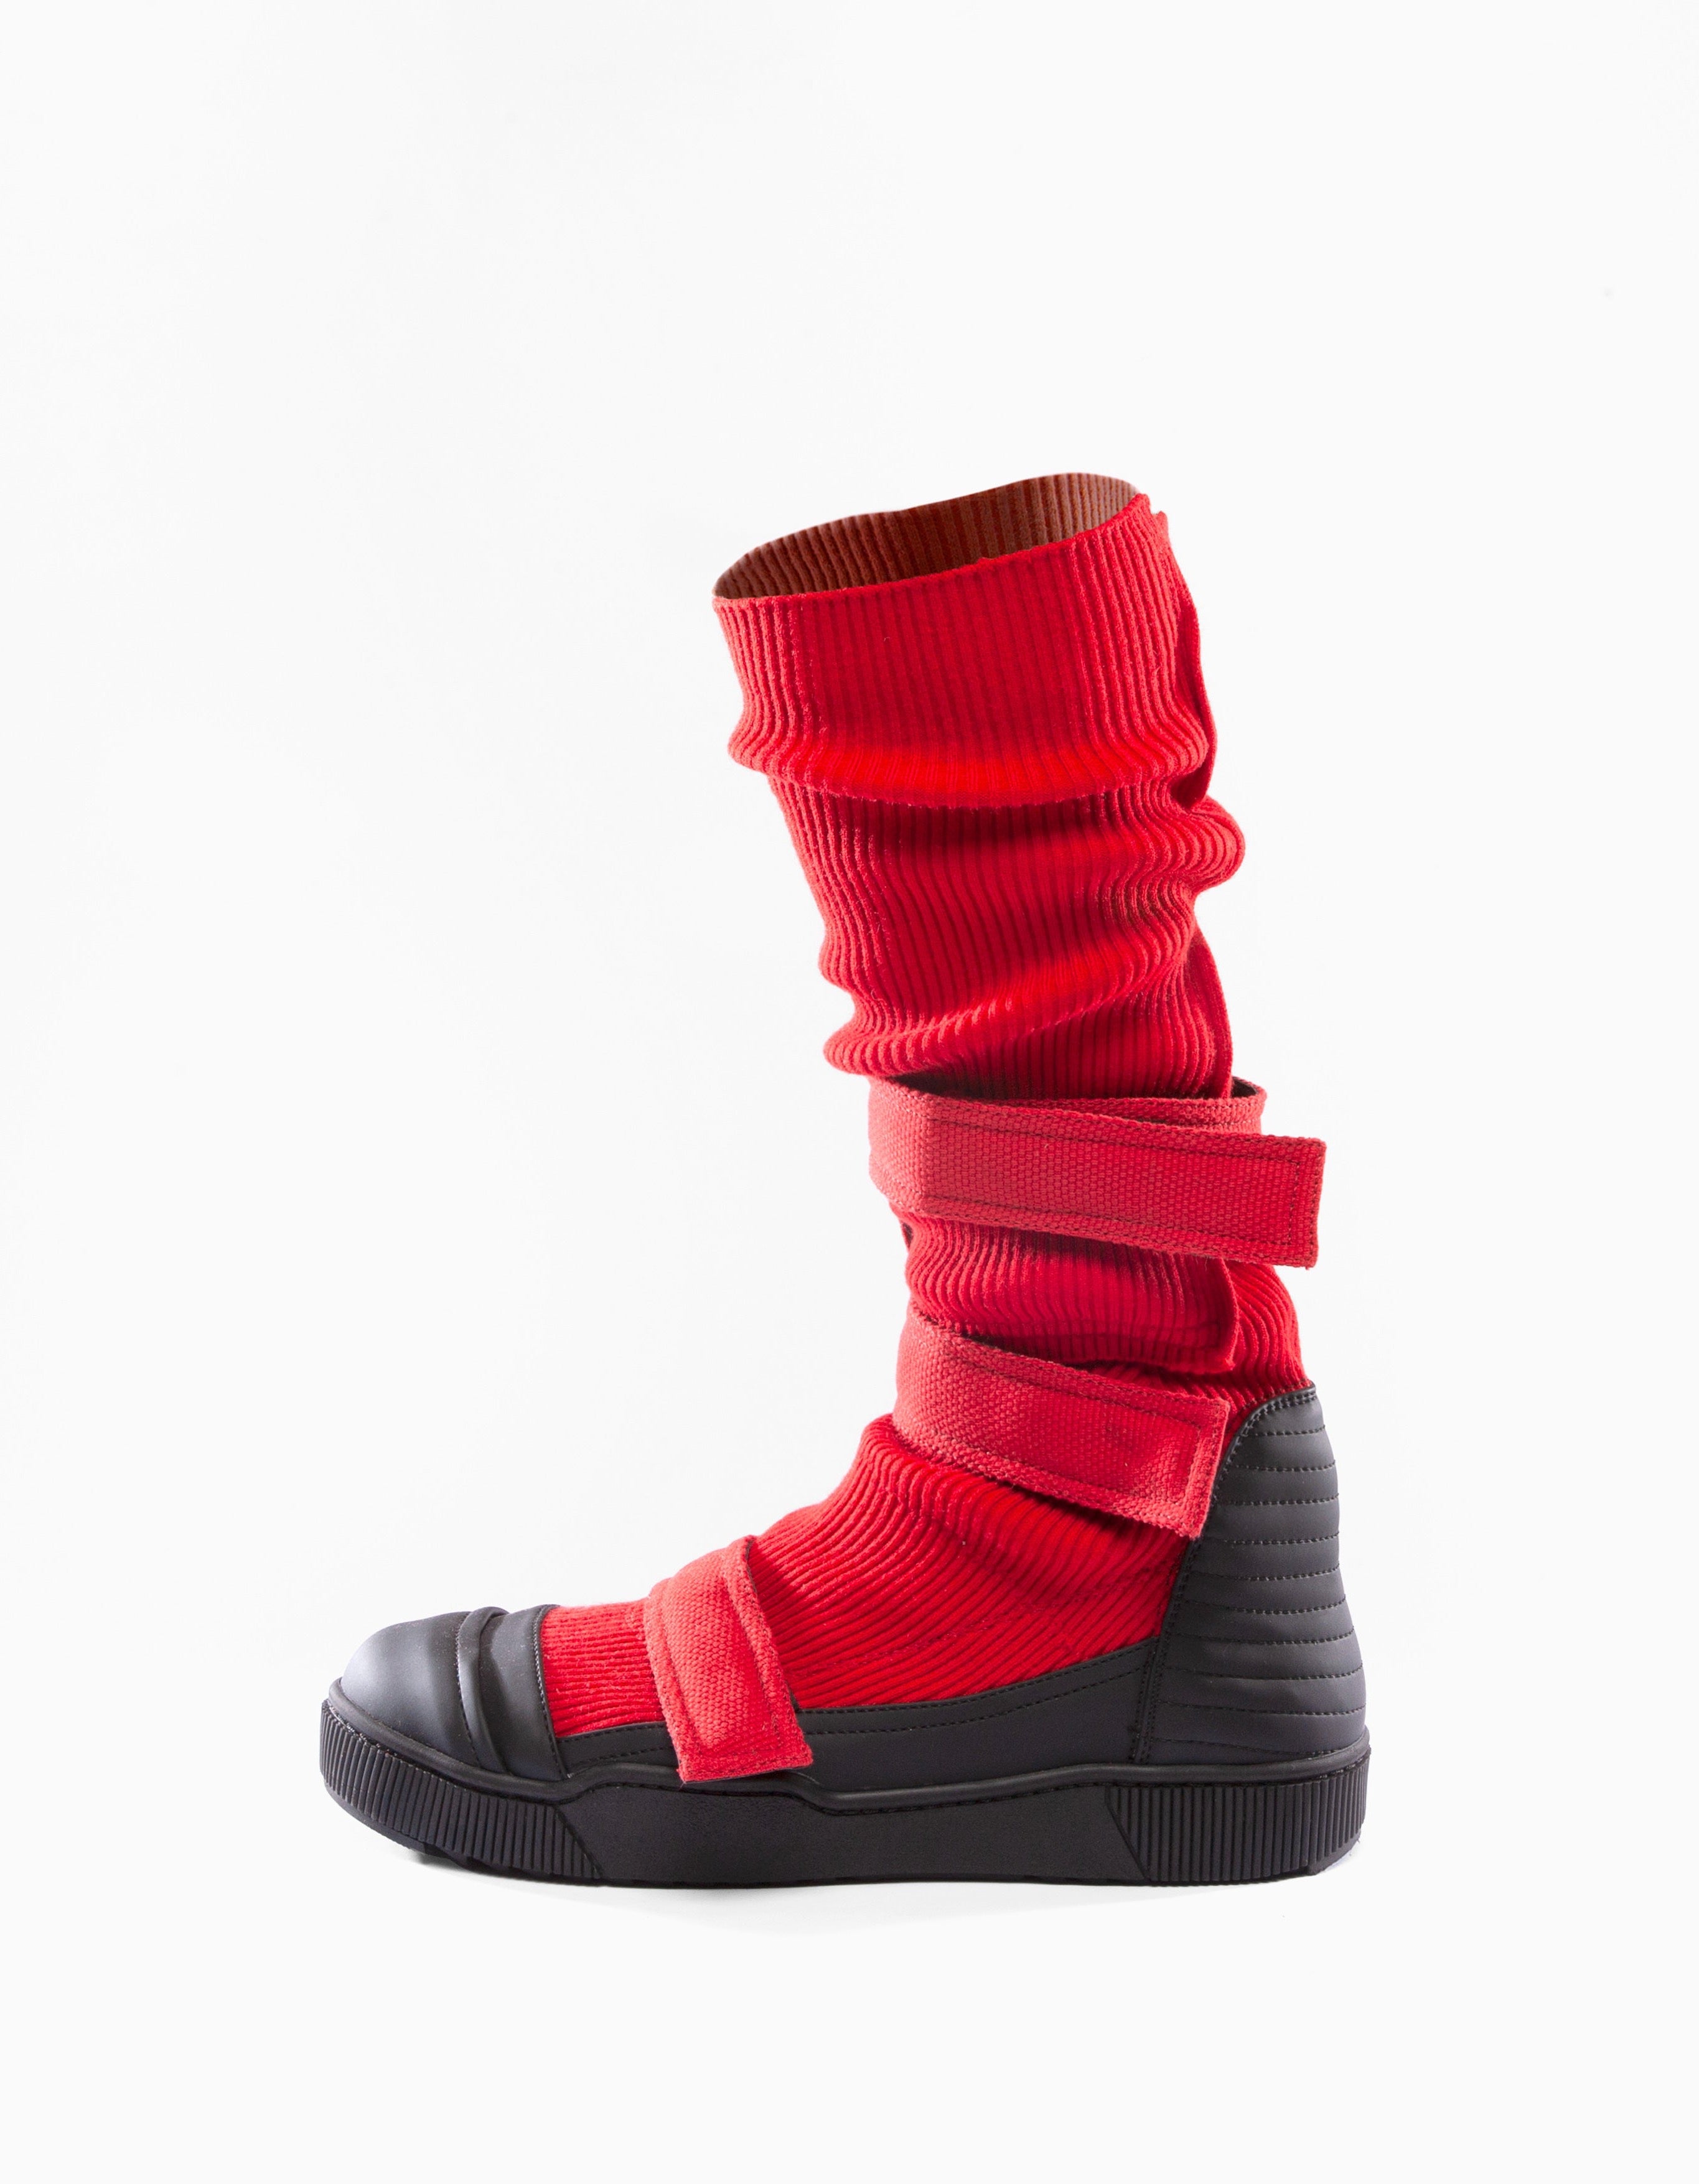 RIPSTIEFEL ROTES BAND M